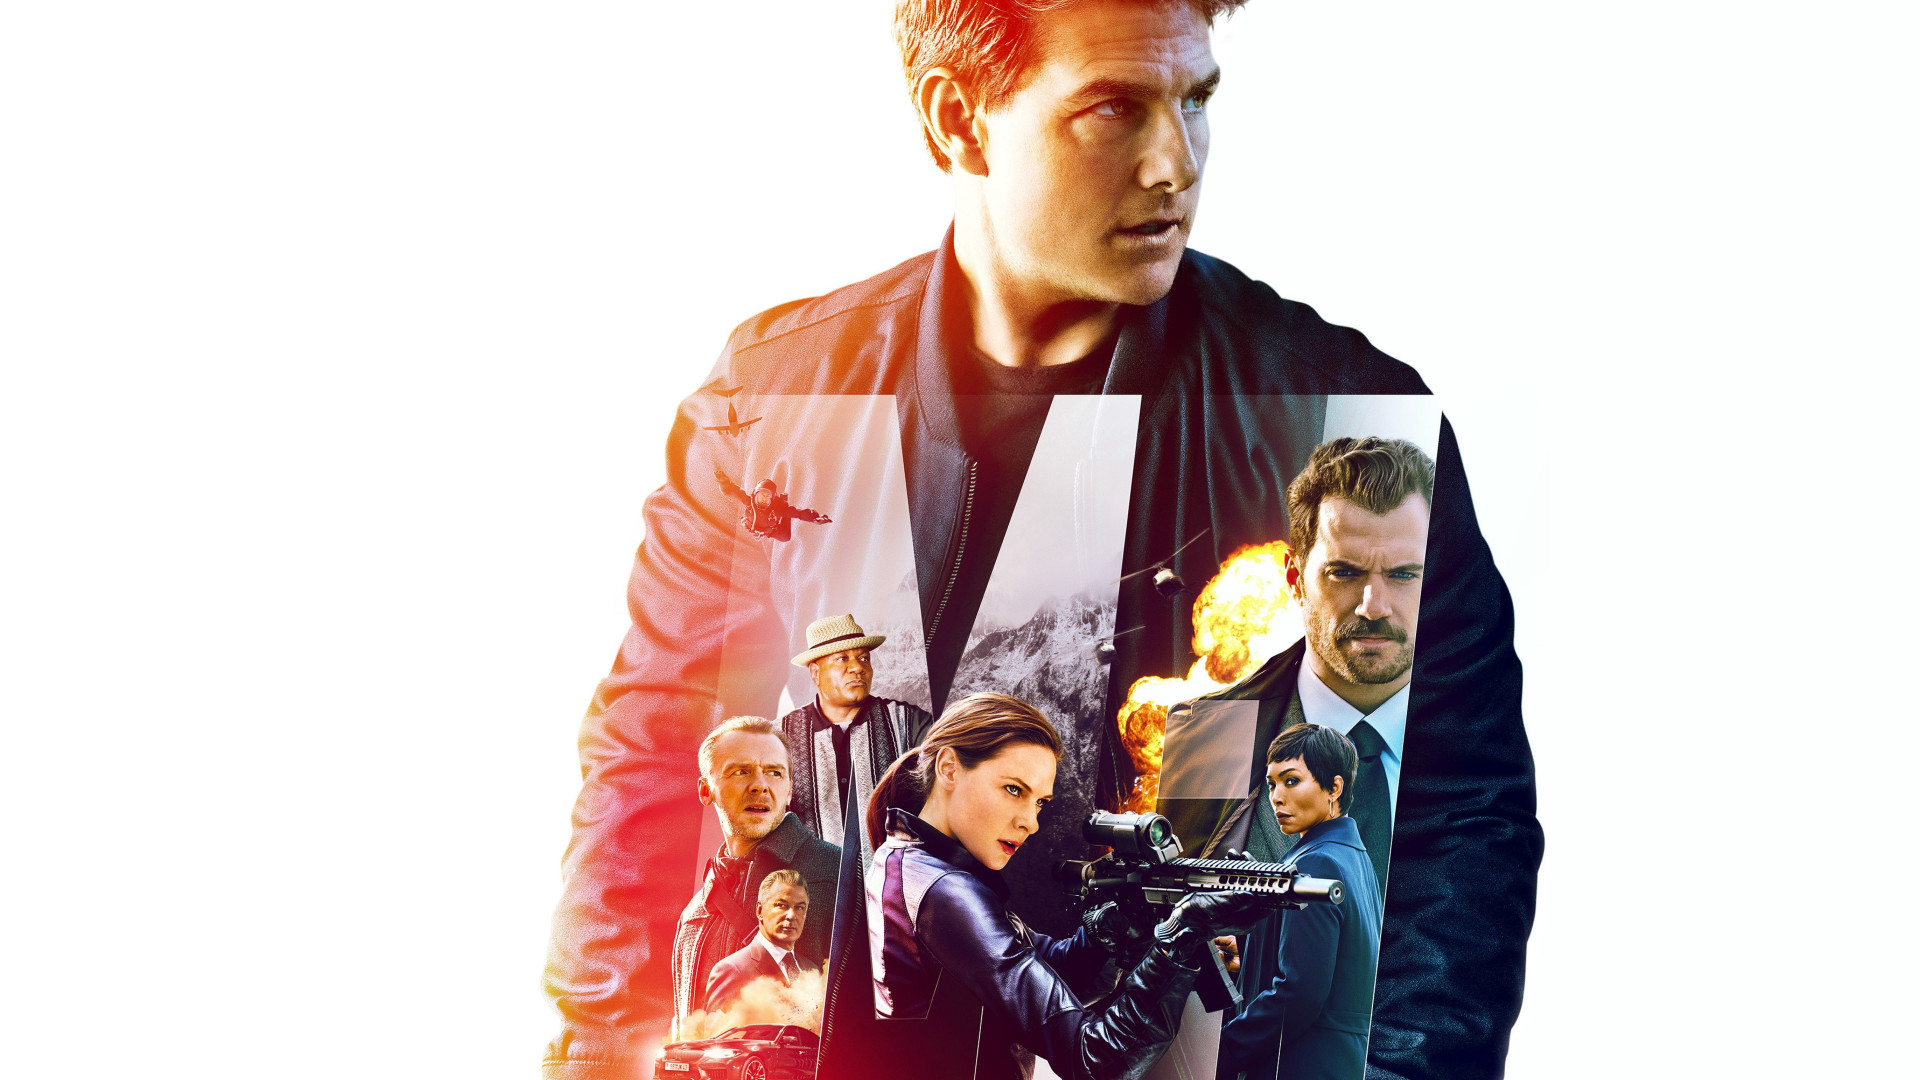 Mission: Impossible Fallout wallpaper 1920x1080